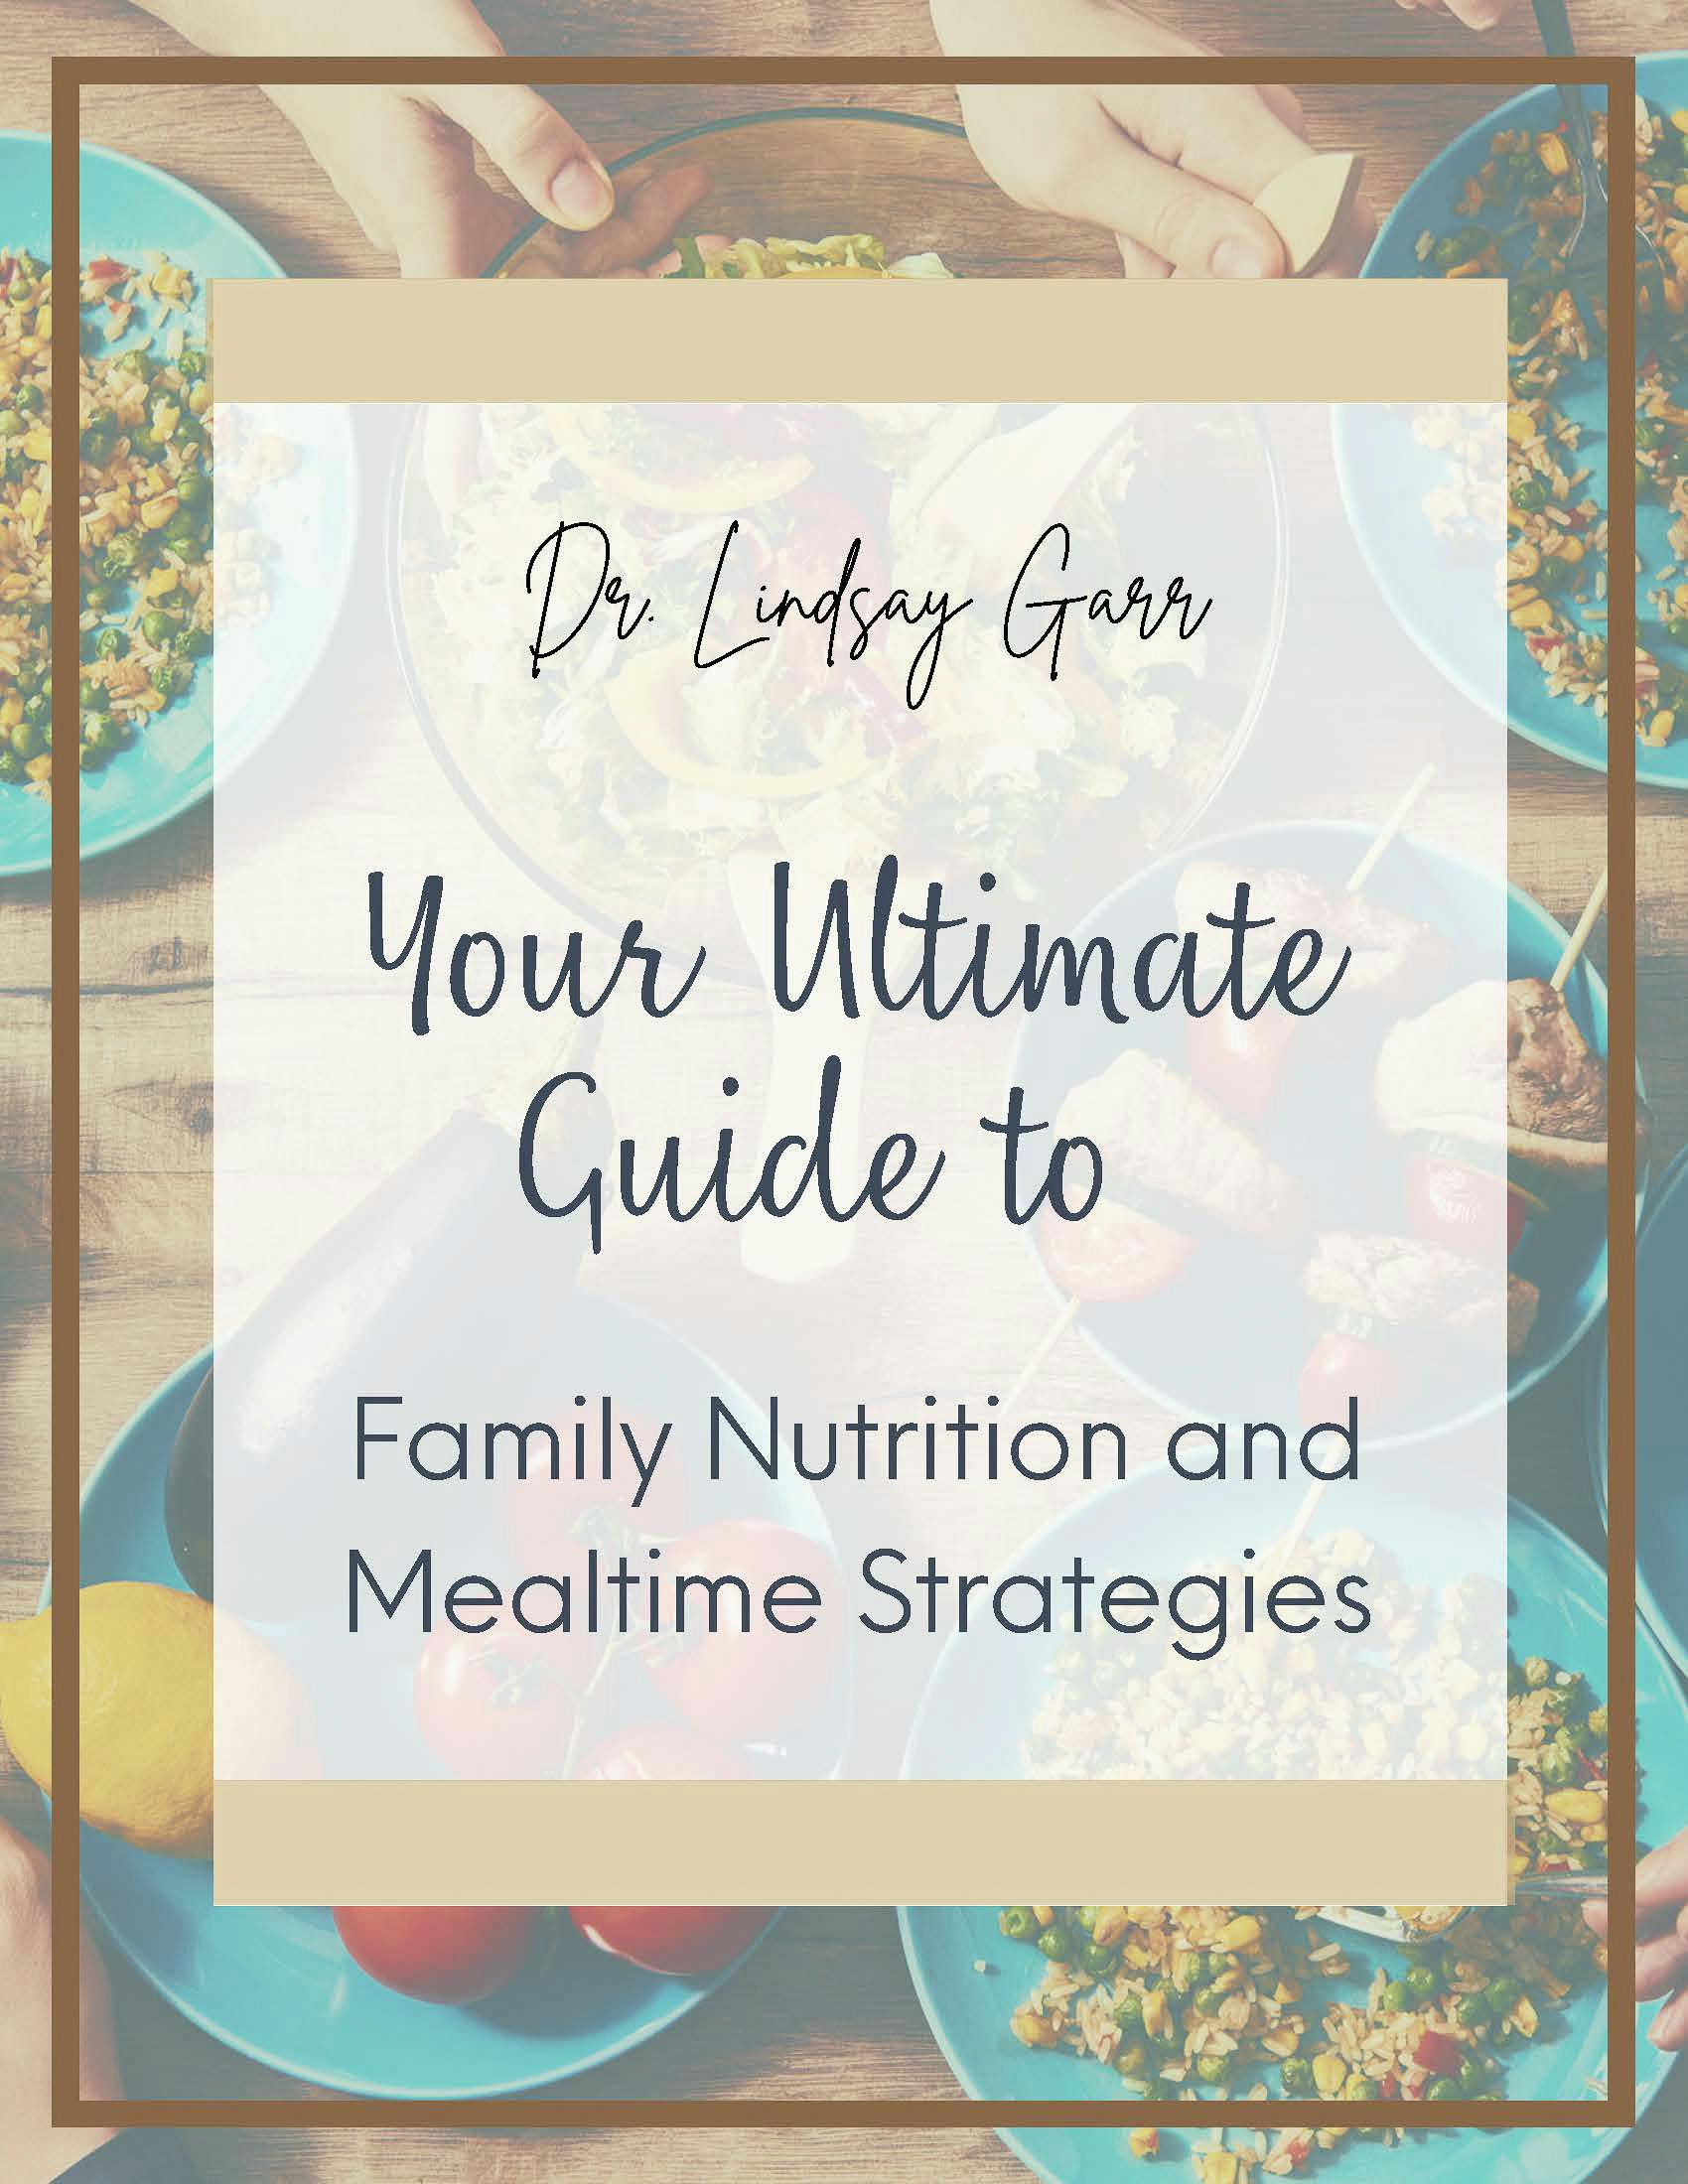 Guide to Family Nutrition and Mealtime Strategies